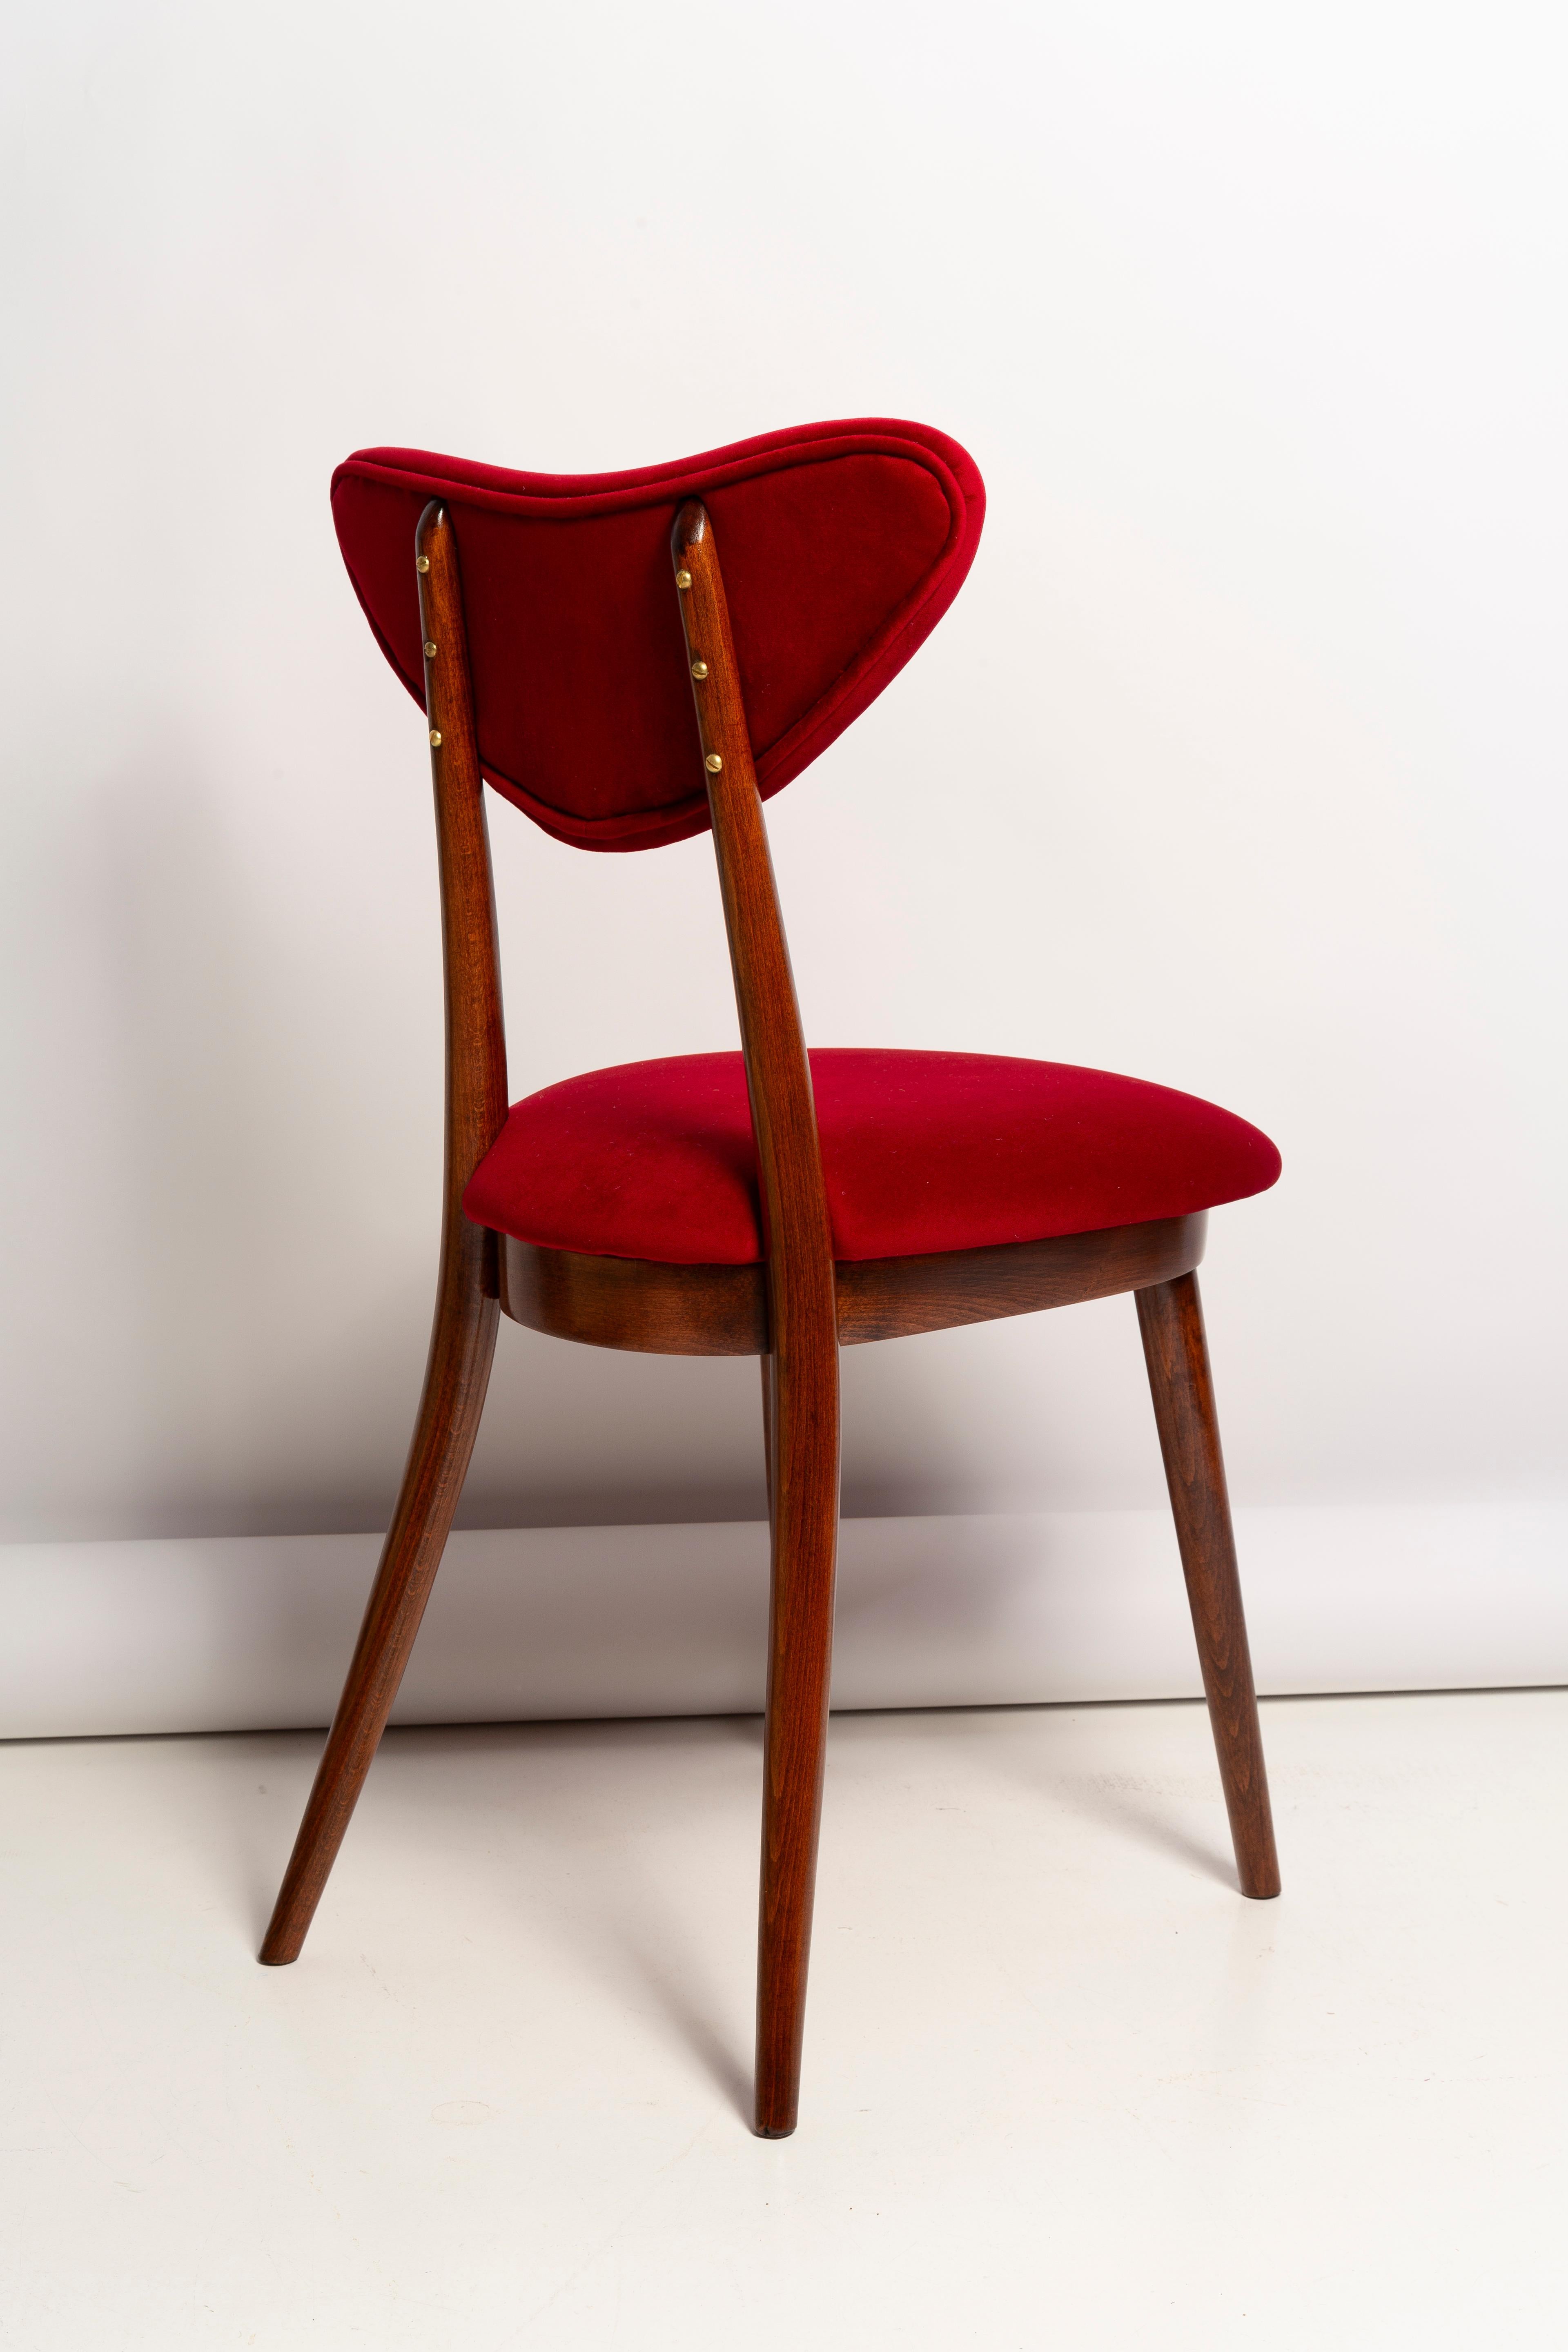 Set of Twelve Mid Century Red Heart Chairs, Poland, 1960s For Sale 4